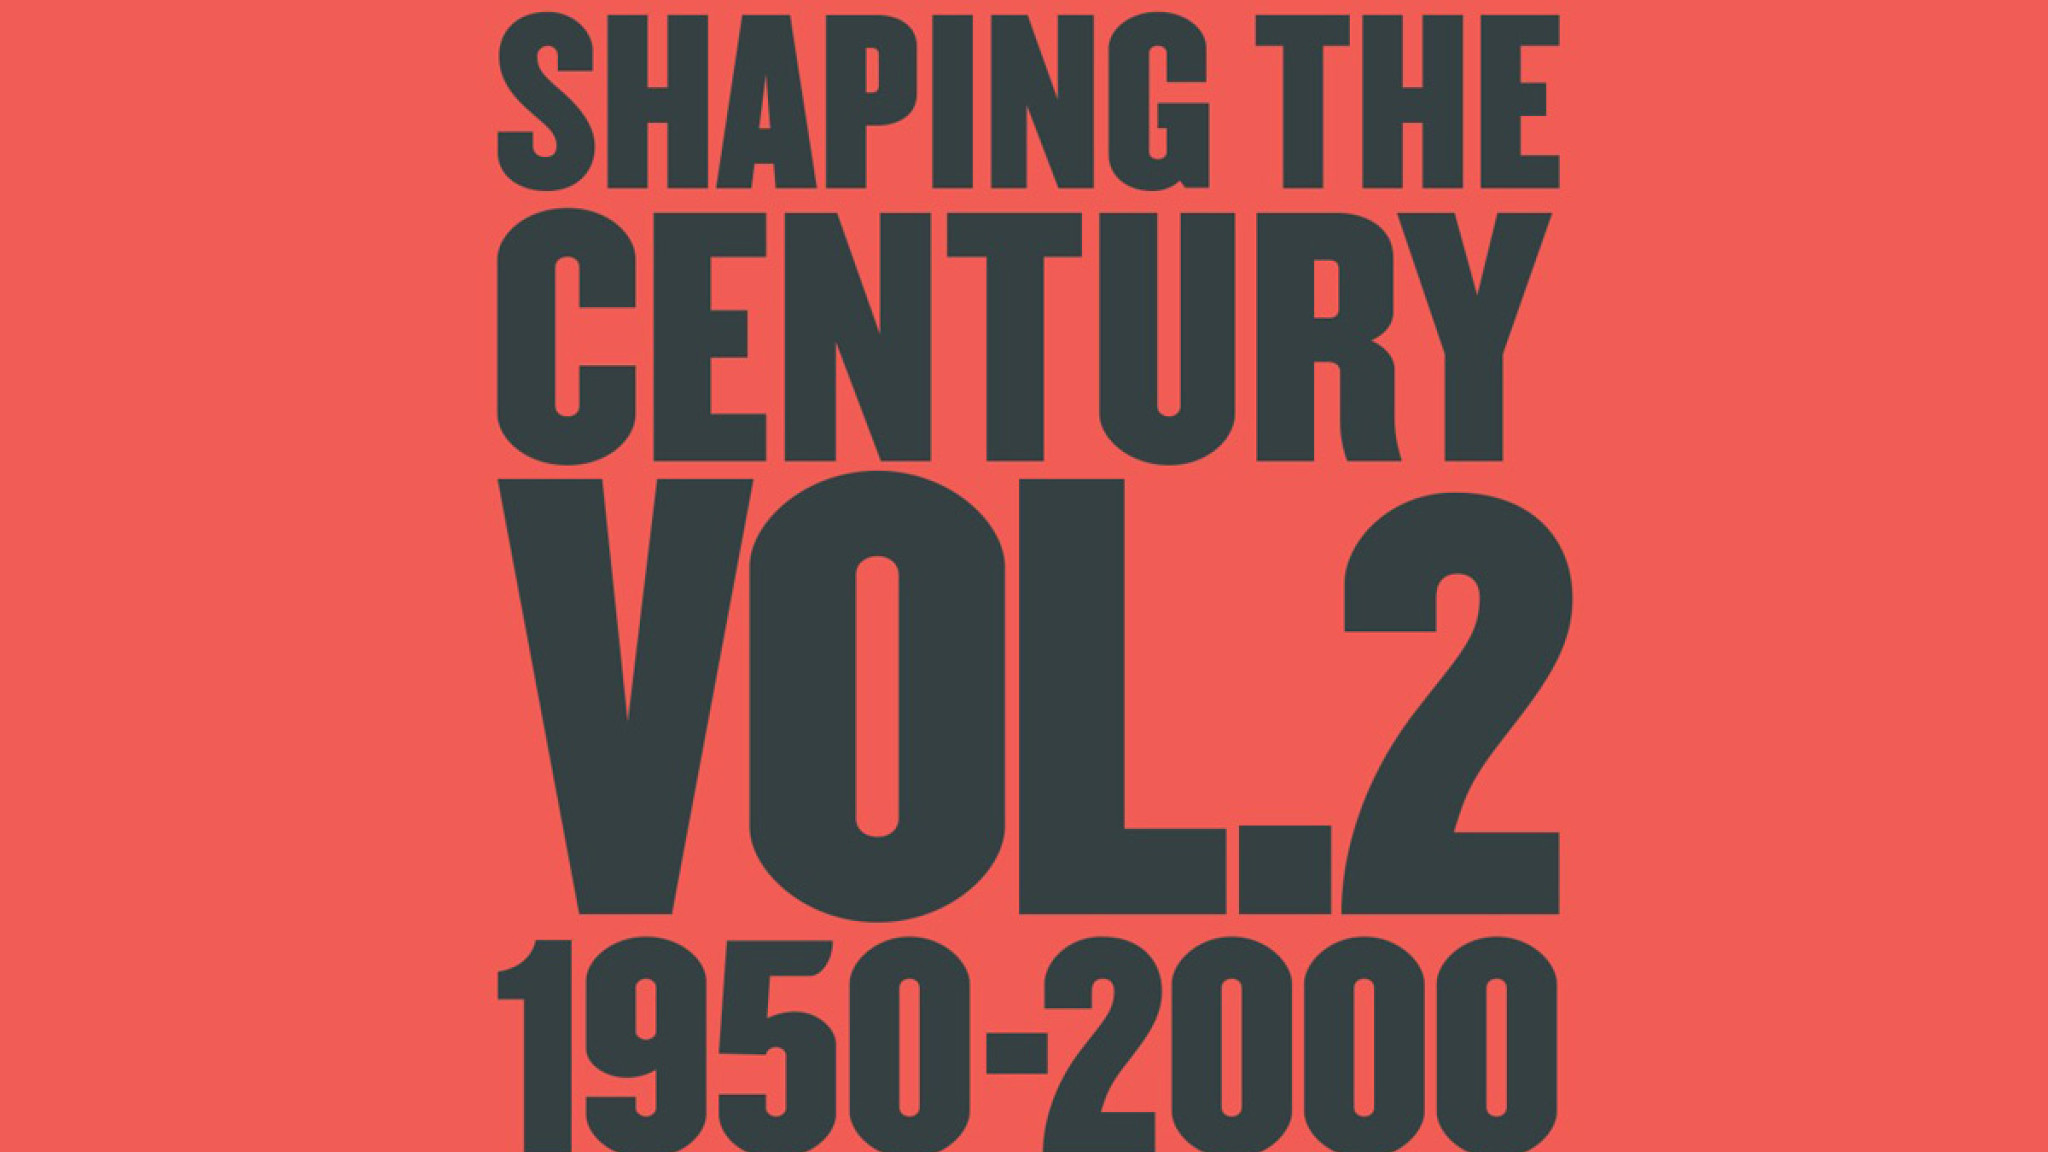 Shaping the Century